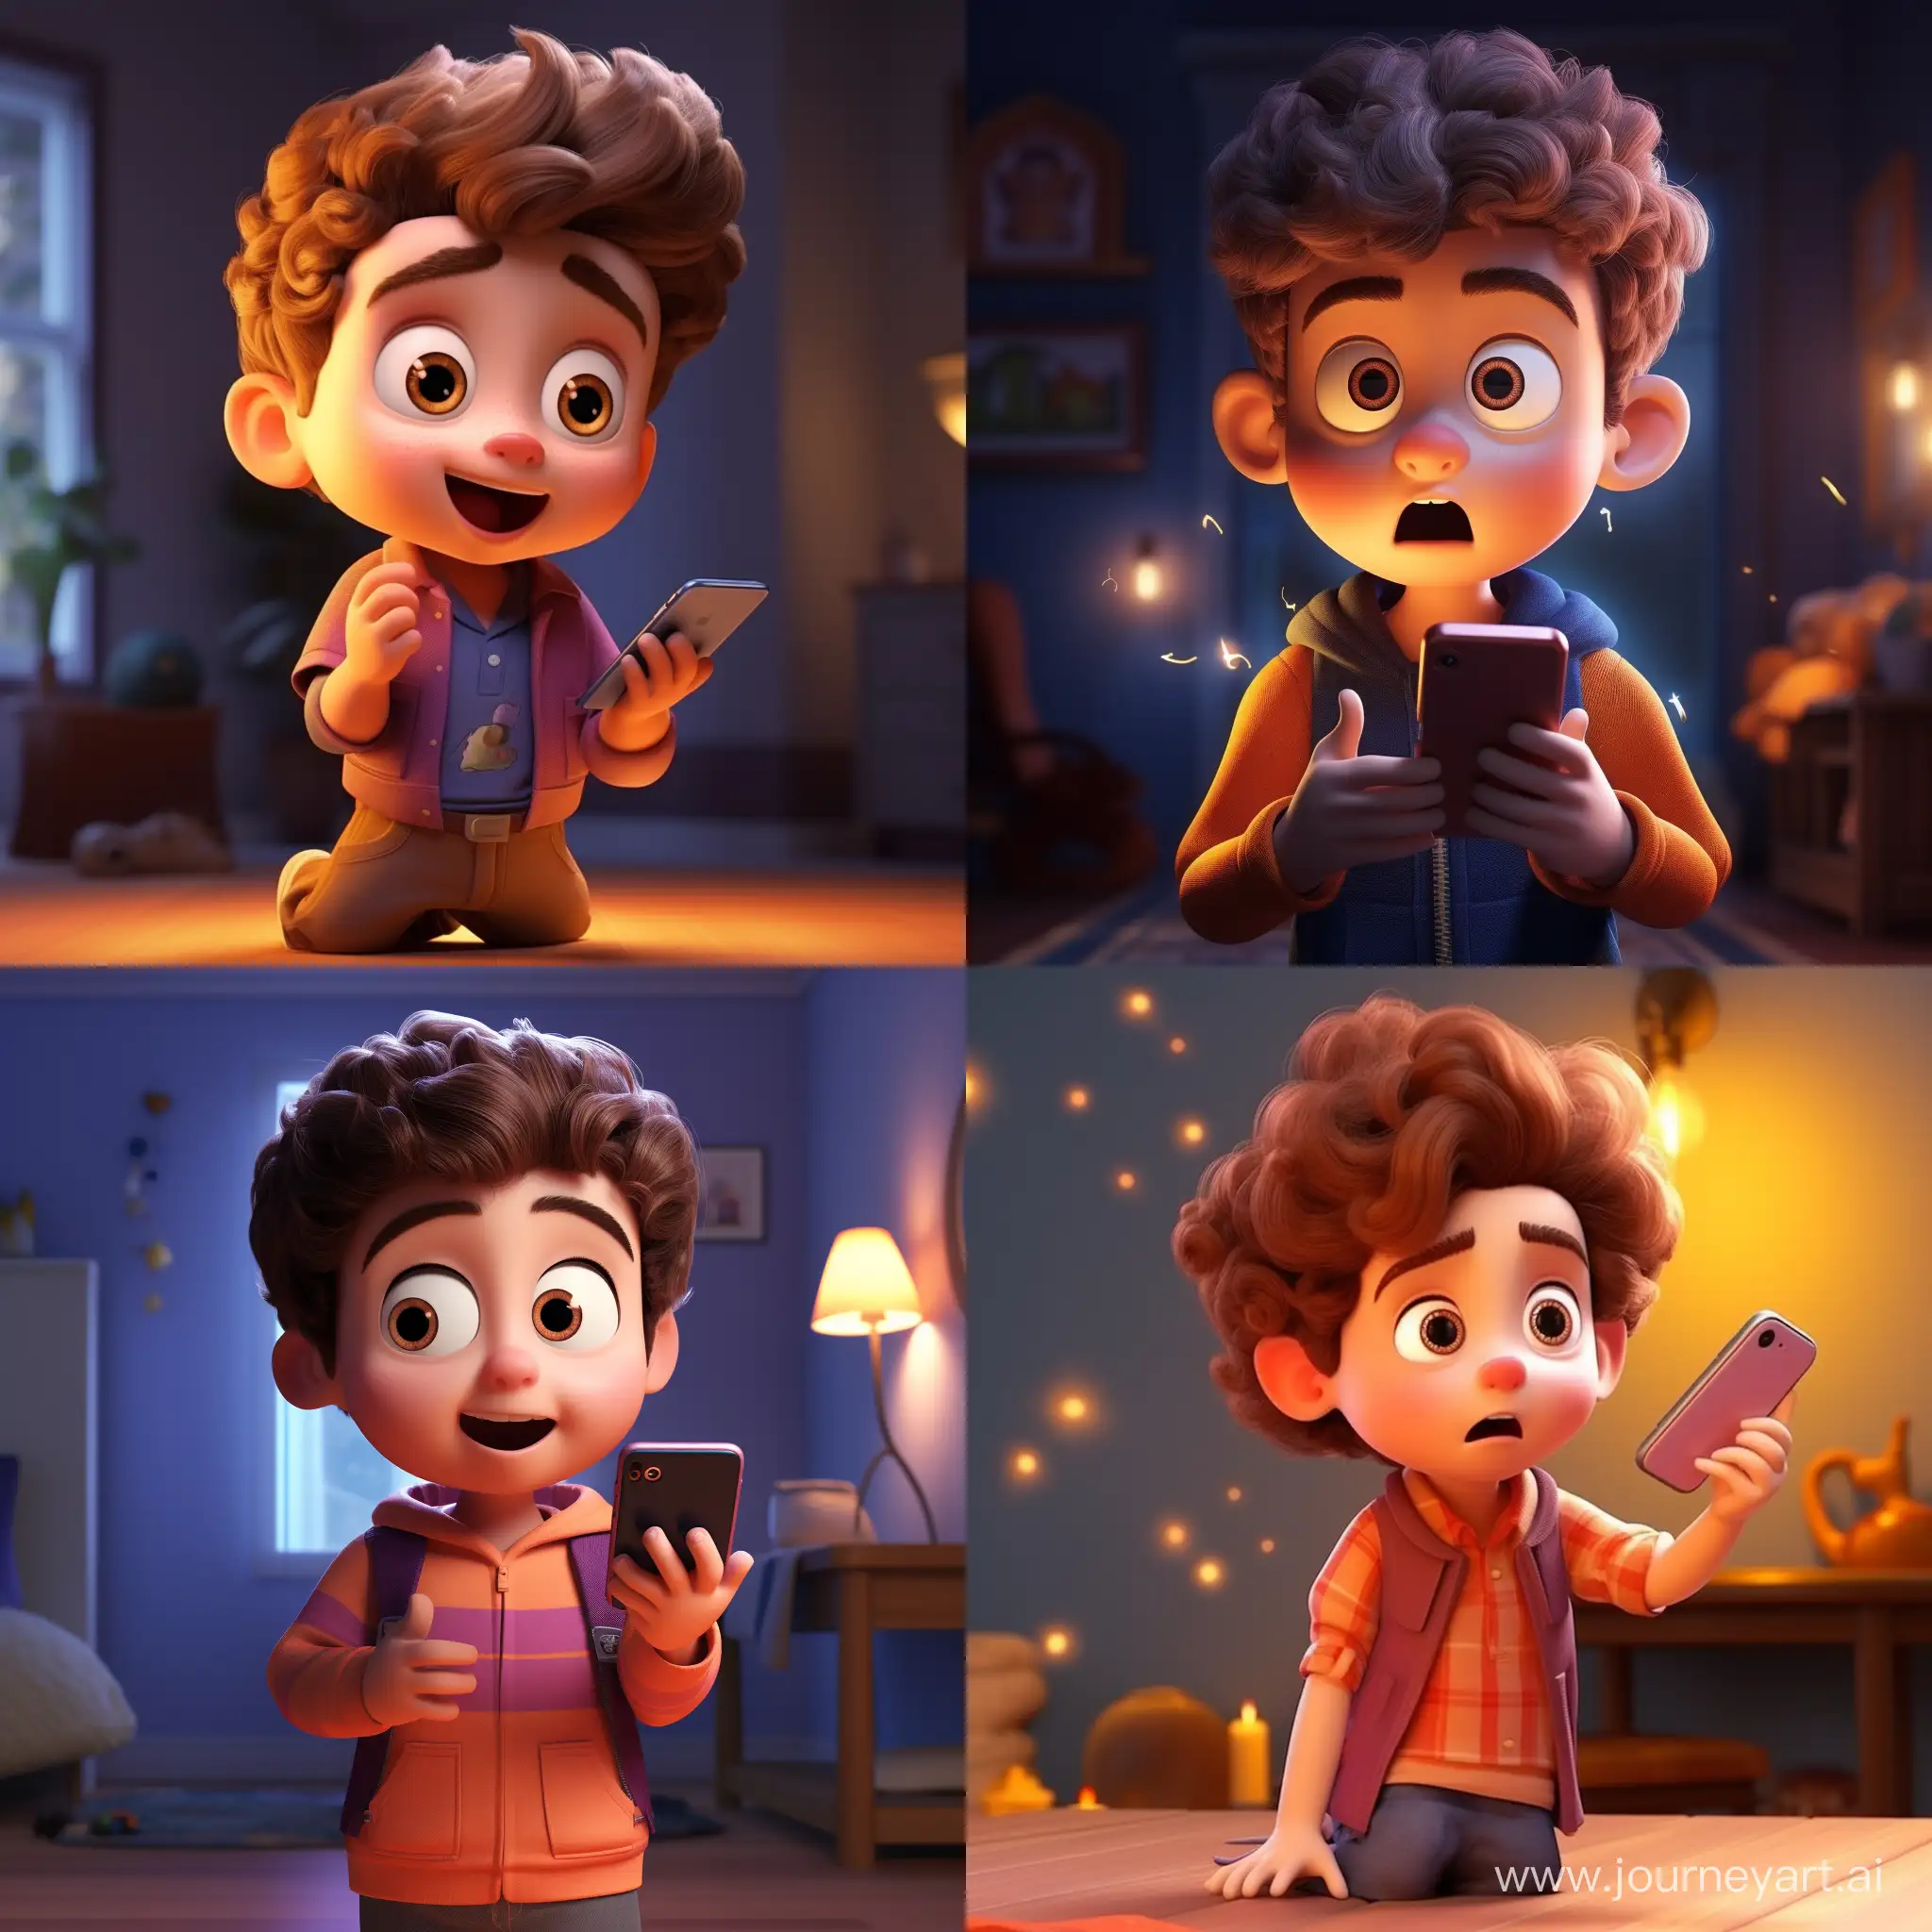 Curious-Boy-Admiring-Phone-with-PixarStyle-Charm